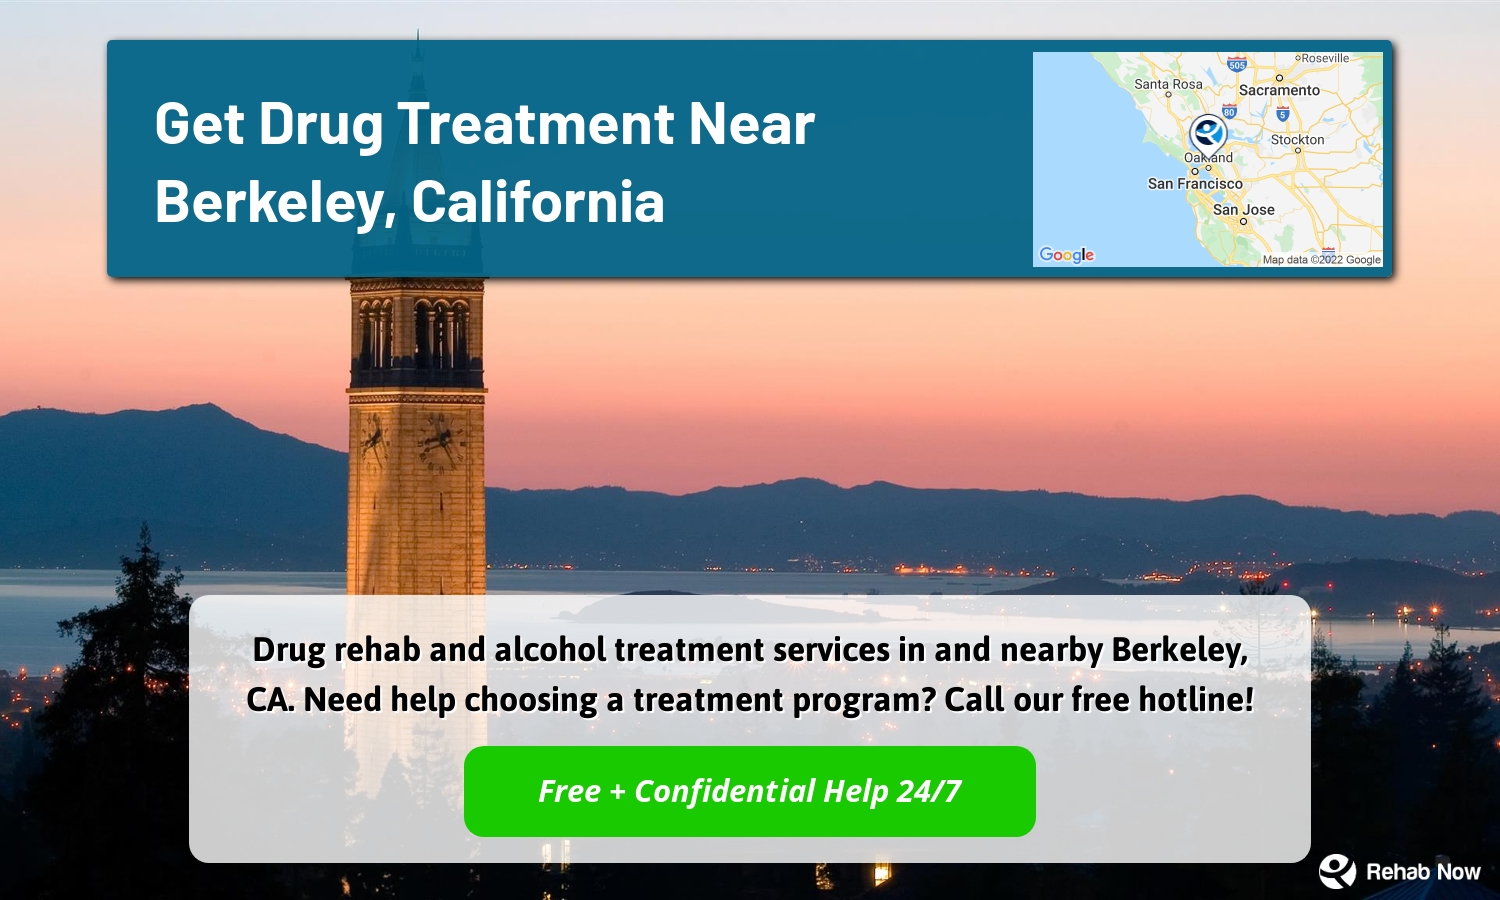 Drug rehab and alcohol treatment services in and nearby Berkeley, CA. Need help choosing a treatment program? Call our free hotline!